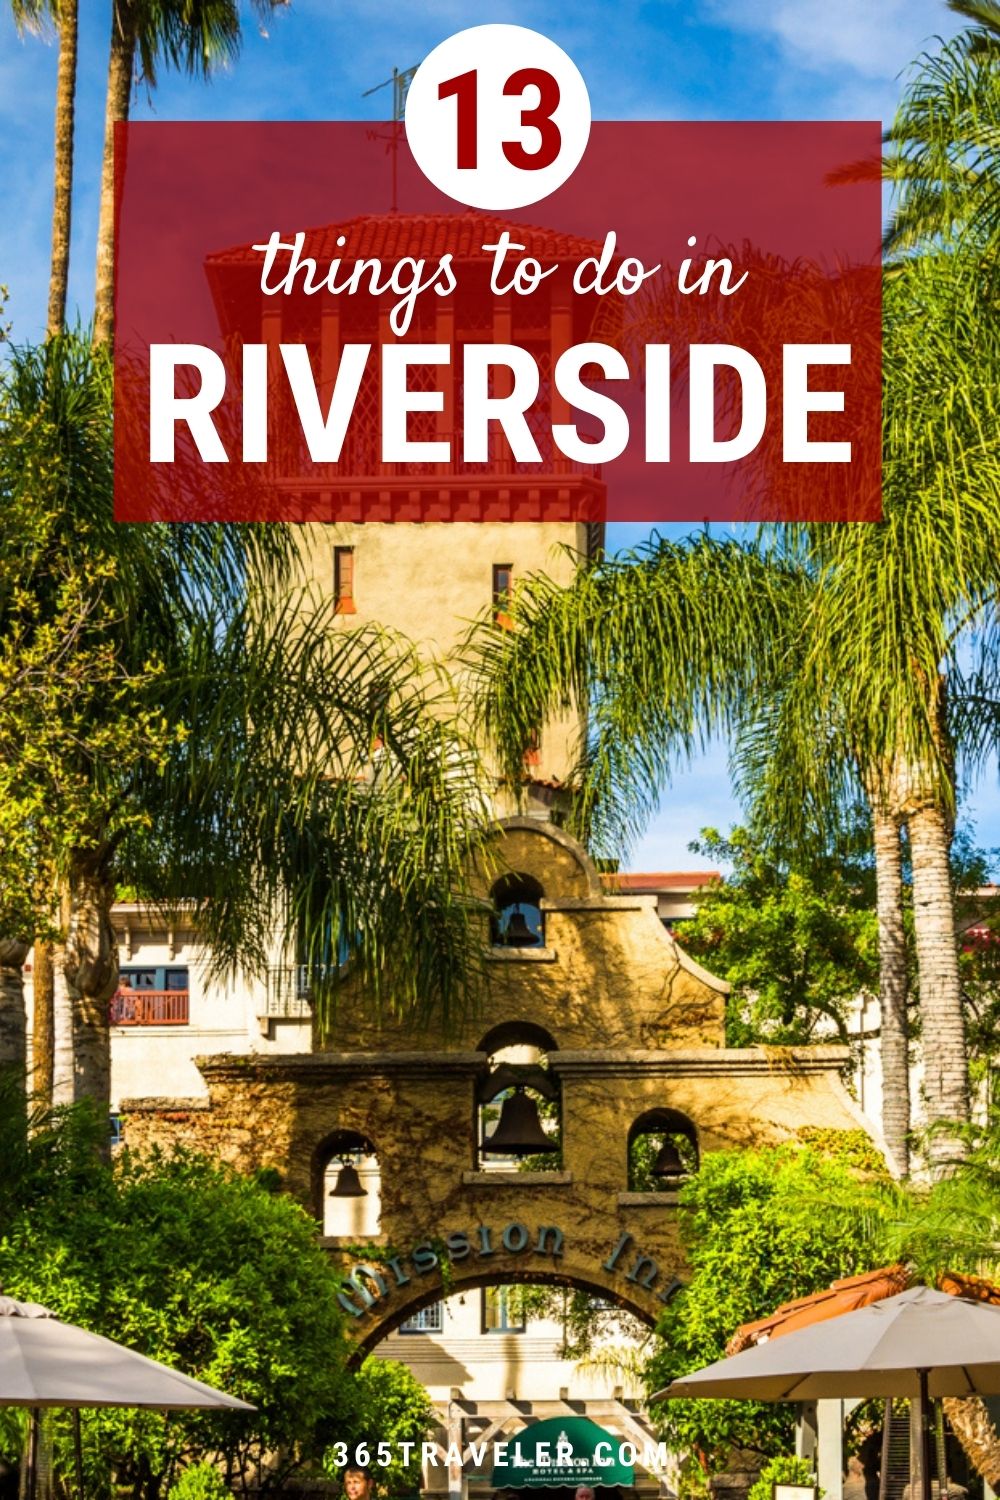 13 Amazing Things To Do in Riverside, California